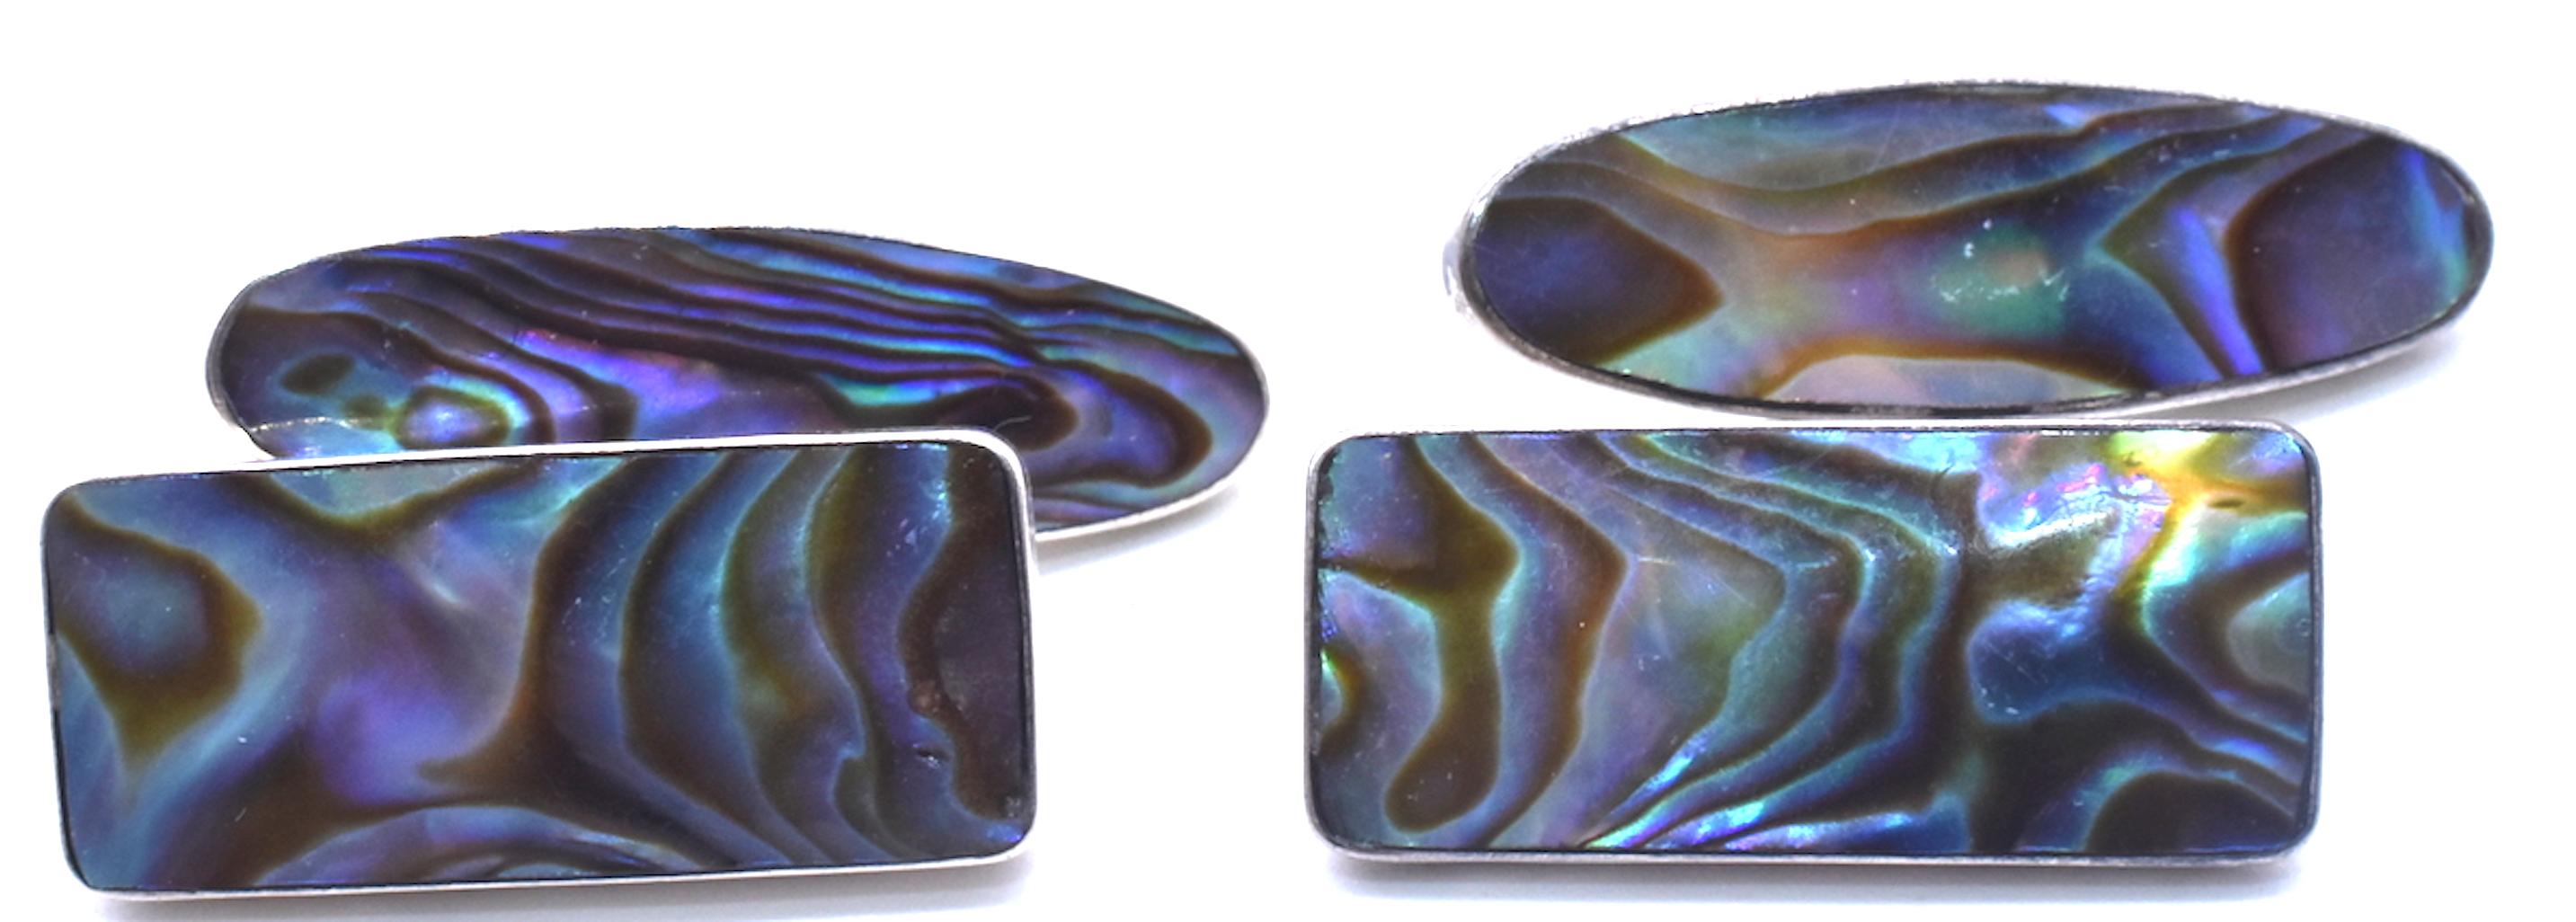 Colorful Abalone and Sterling cufflinks, c1900, a great gift for that special French Cuff Guy.  